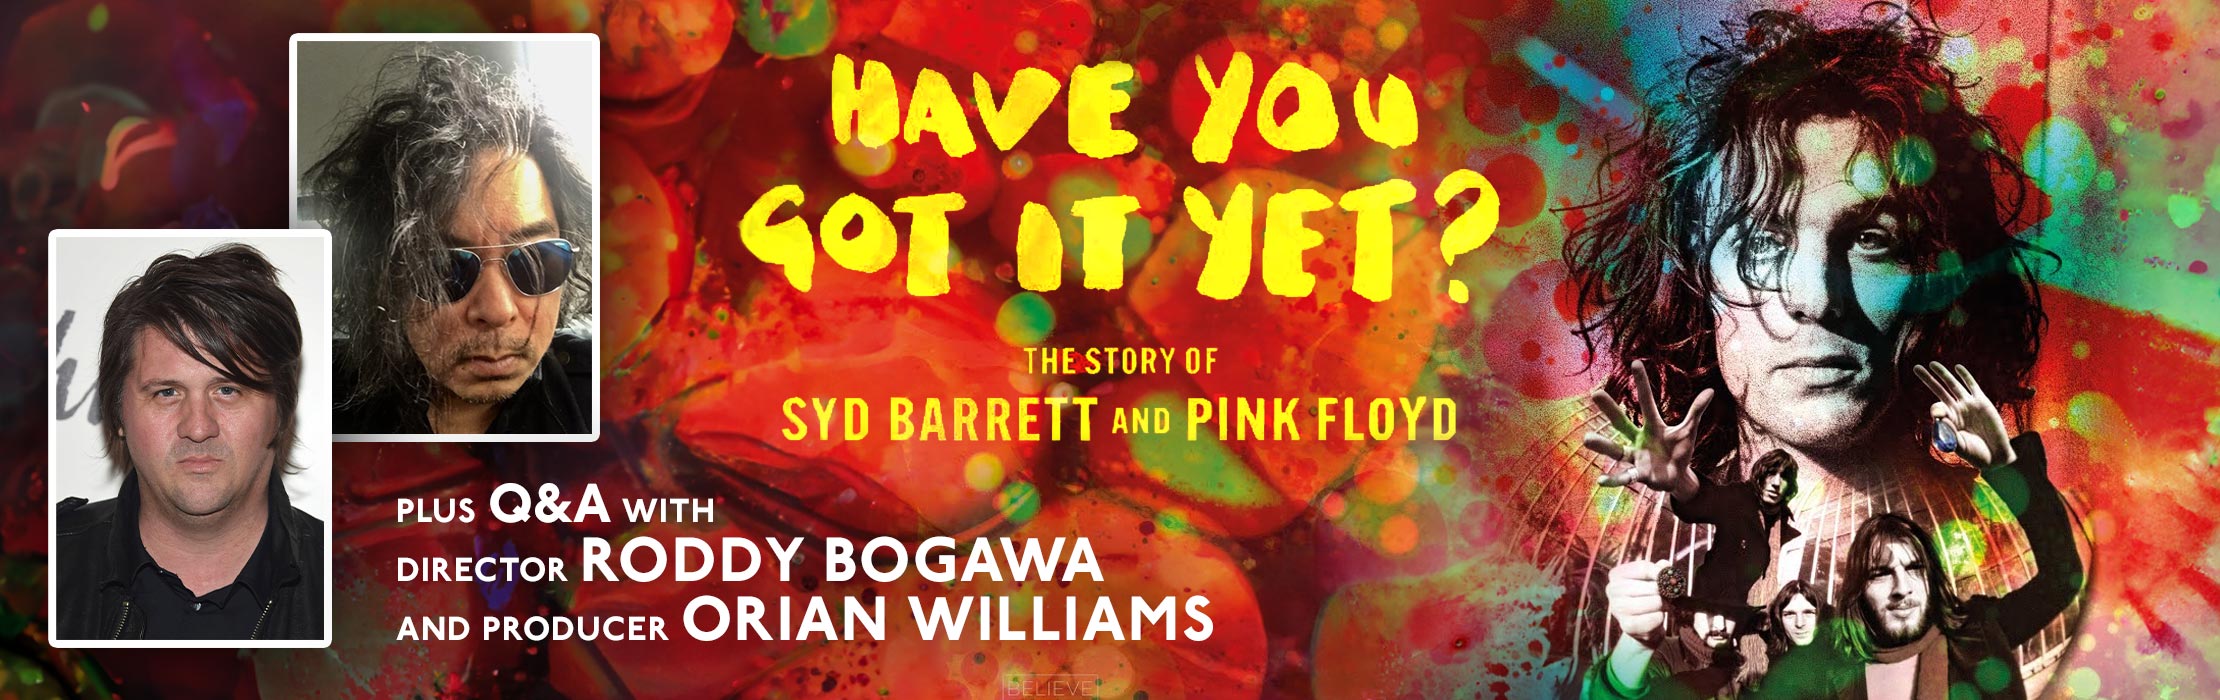 Have You Got It Yet The Story of Syd Barrett and Pink Floyd